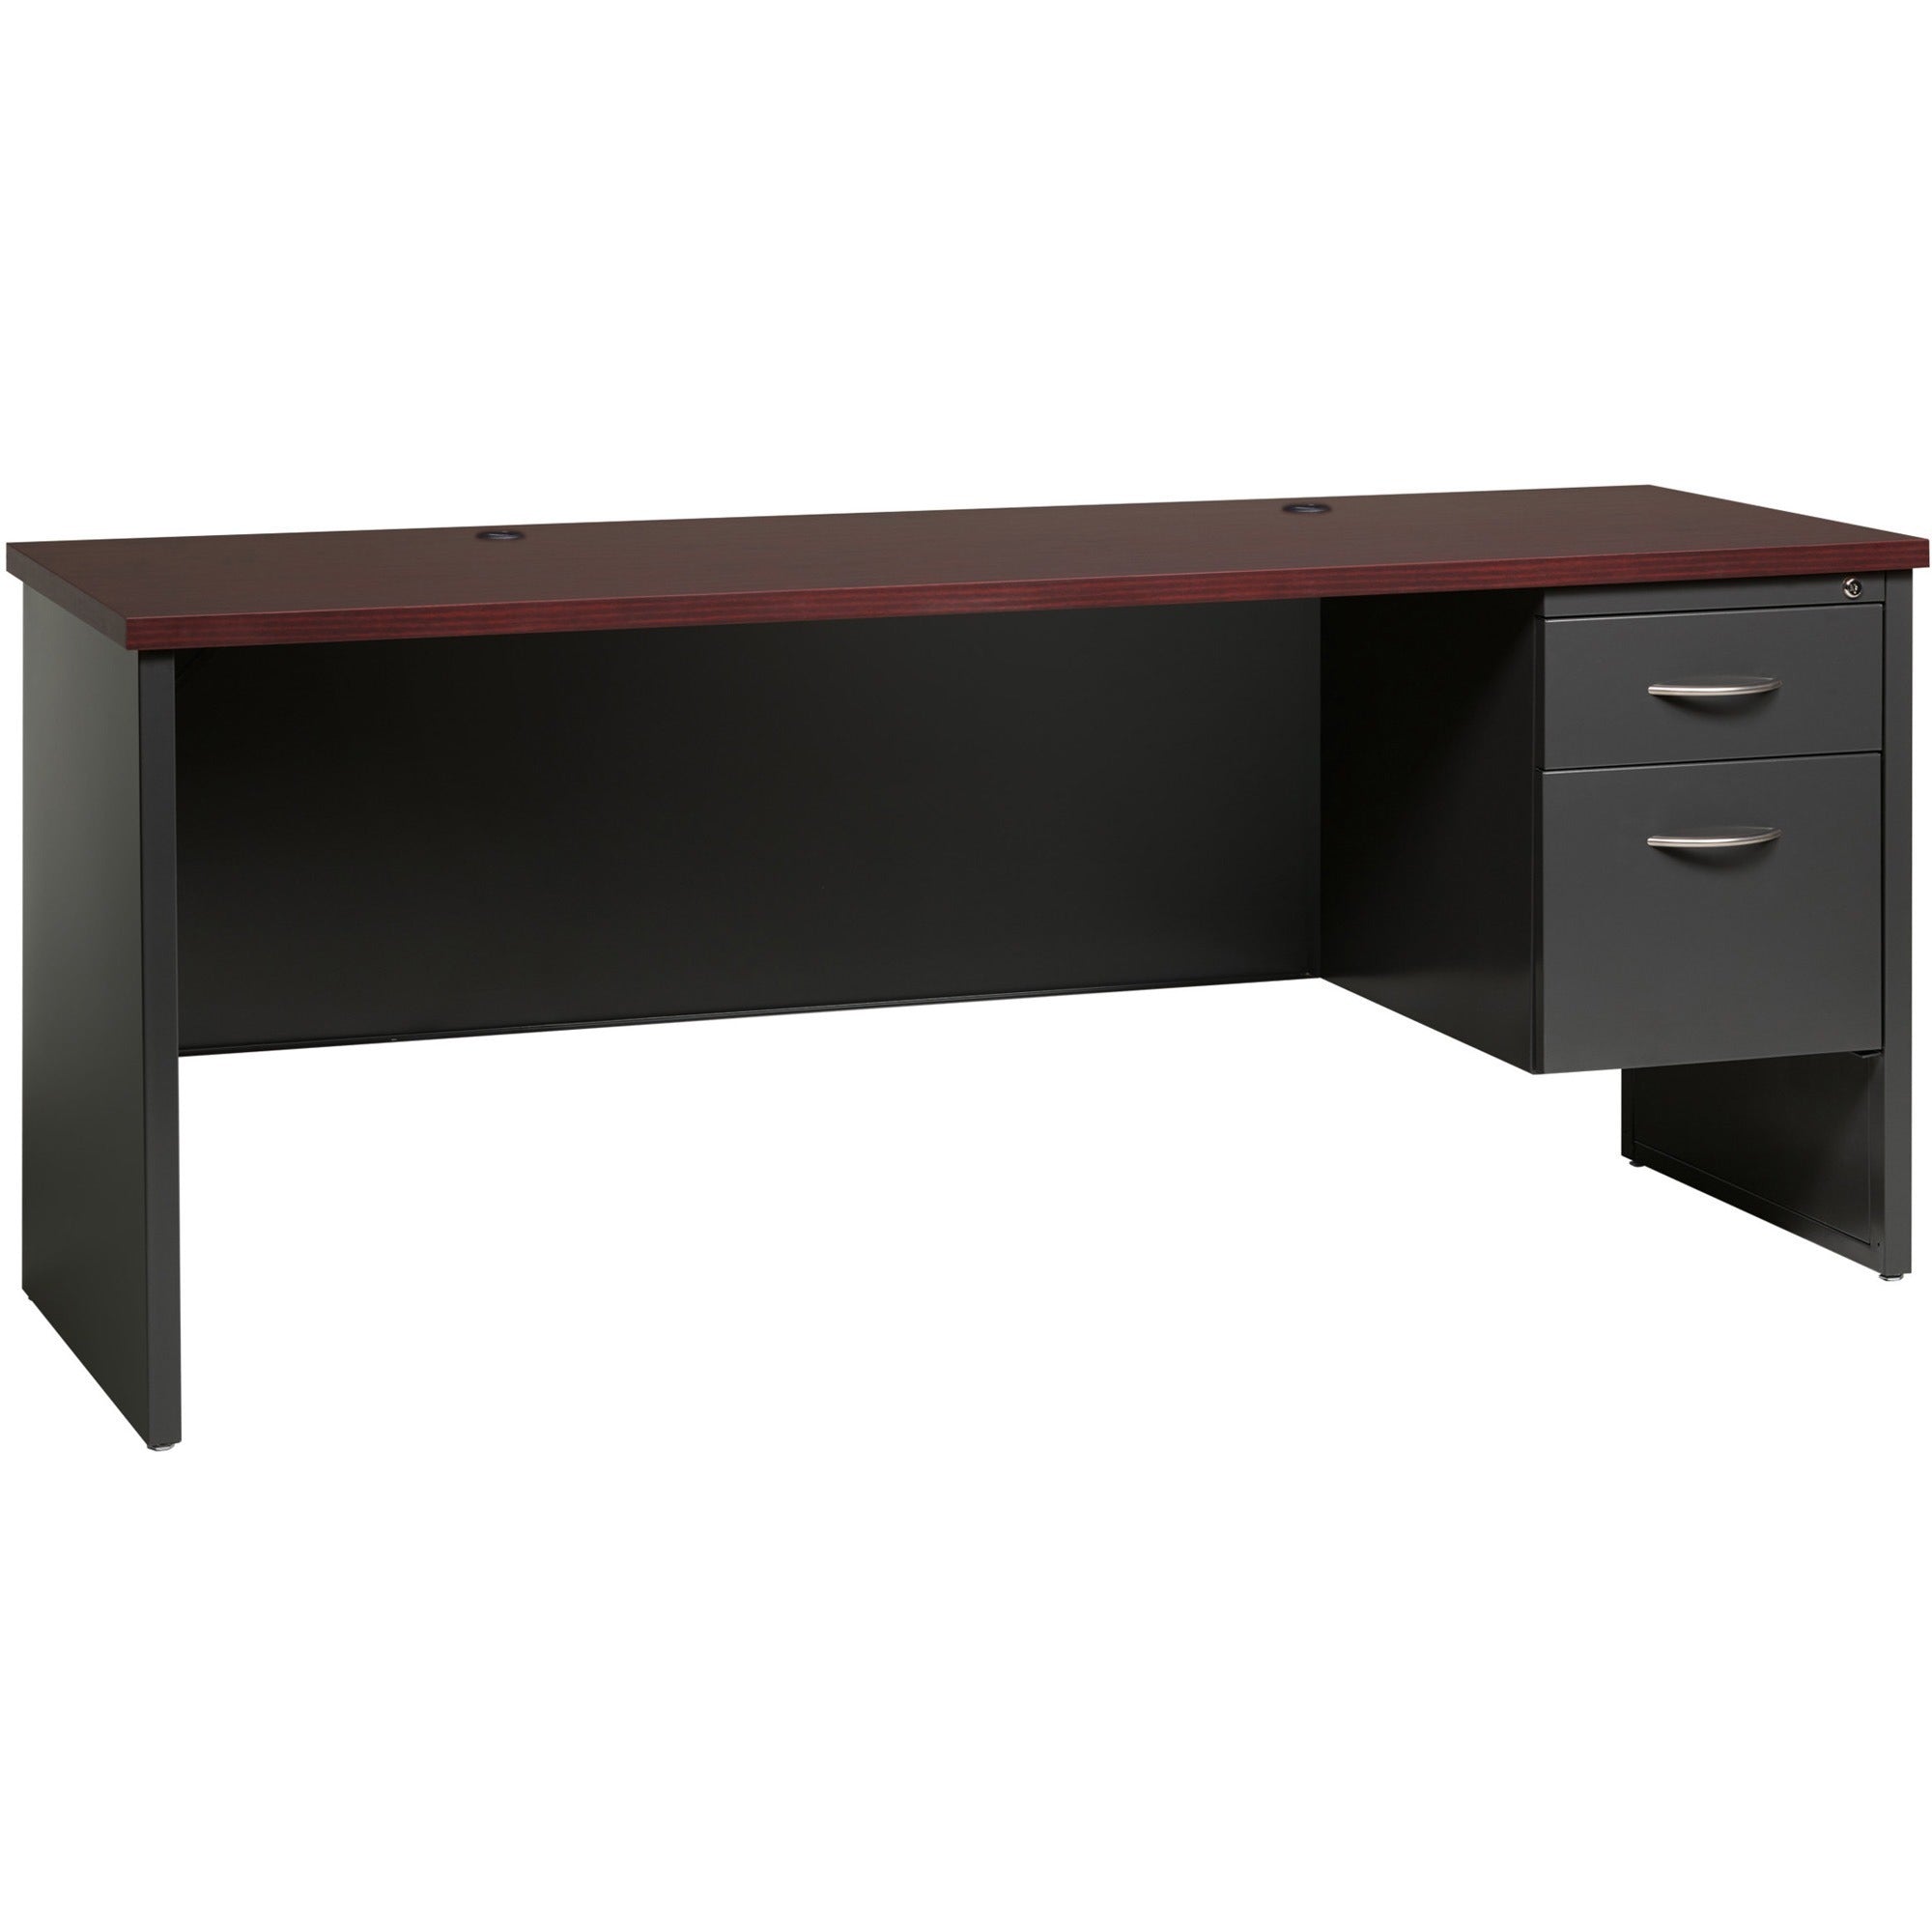 Lorell Fortress Modular Series Right-pedestal Credenza - 72" x 24" , 1.1" Top - 2 x Box, File Drawer(s) - Single Pedestal on Right Side - Material: Steel - Finish: Mahogany Laminate, Charcoal - Scratch Resistant, Stain Resistant, Ball-bearing Suspens - 